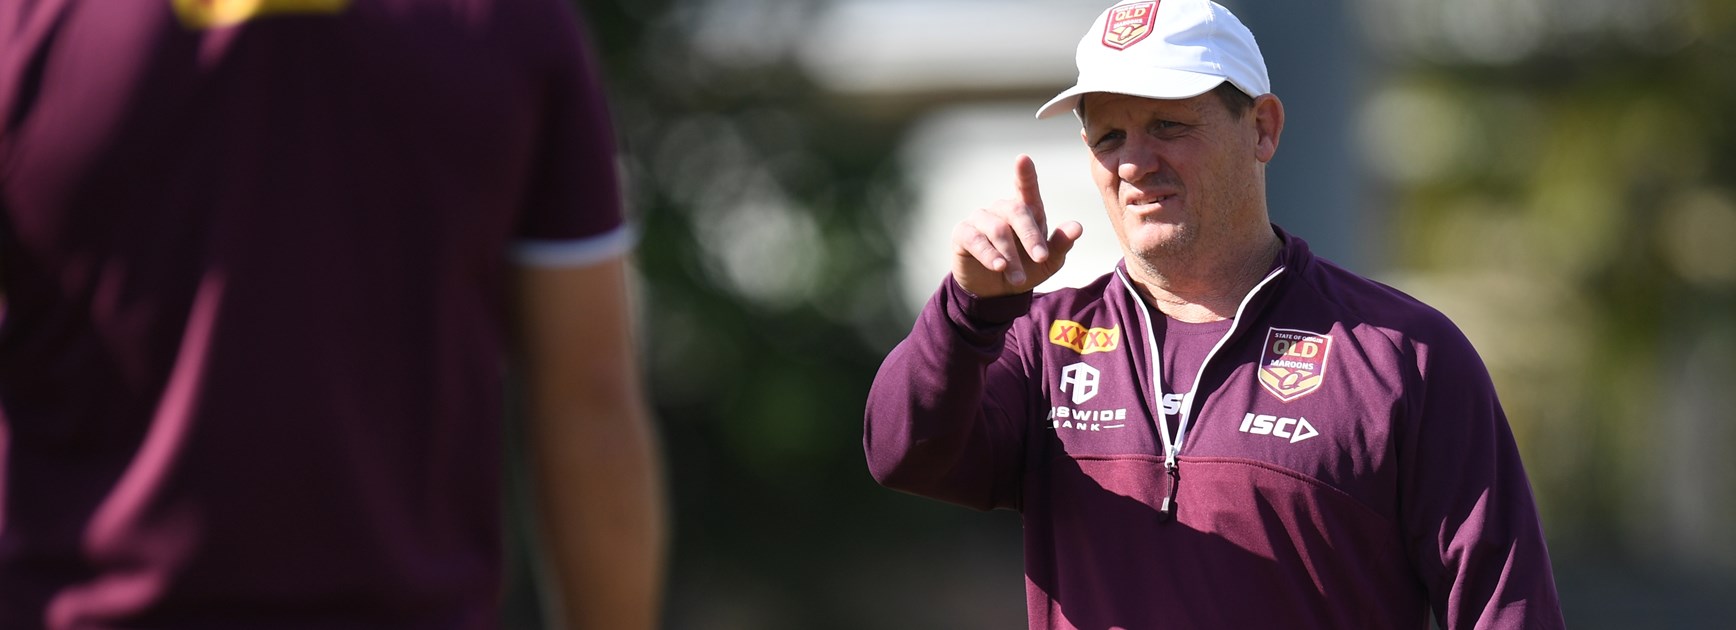 Loyalty and stability: Maroons extend Walters deal into 2021